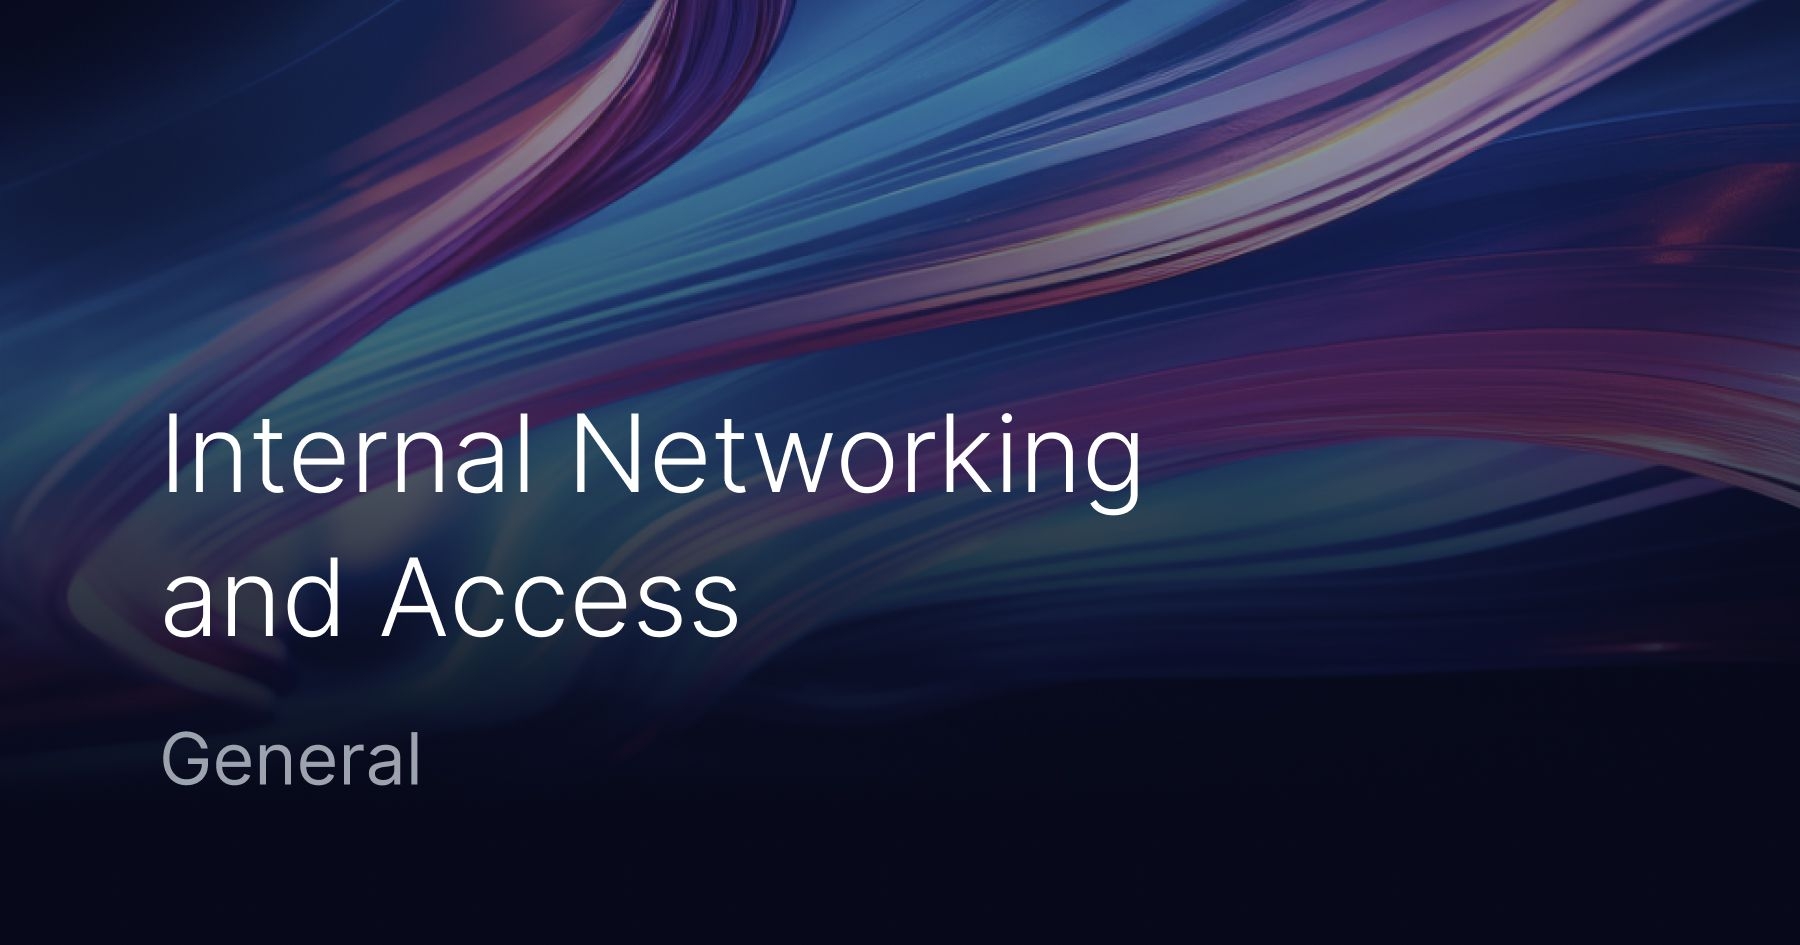 Evolution of Internal Networking and Access in Organizations